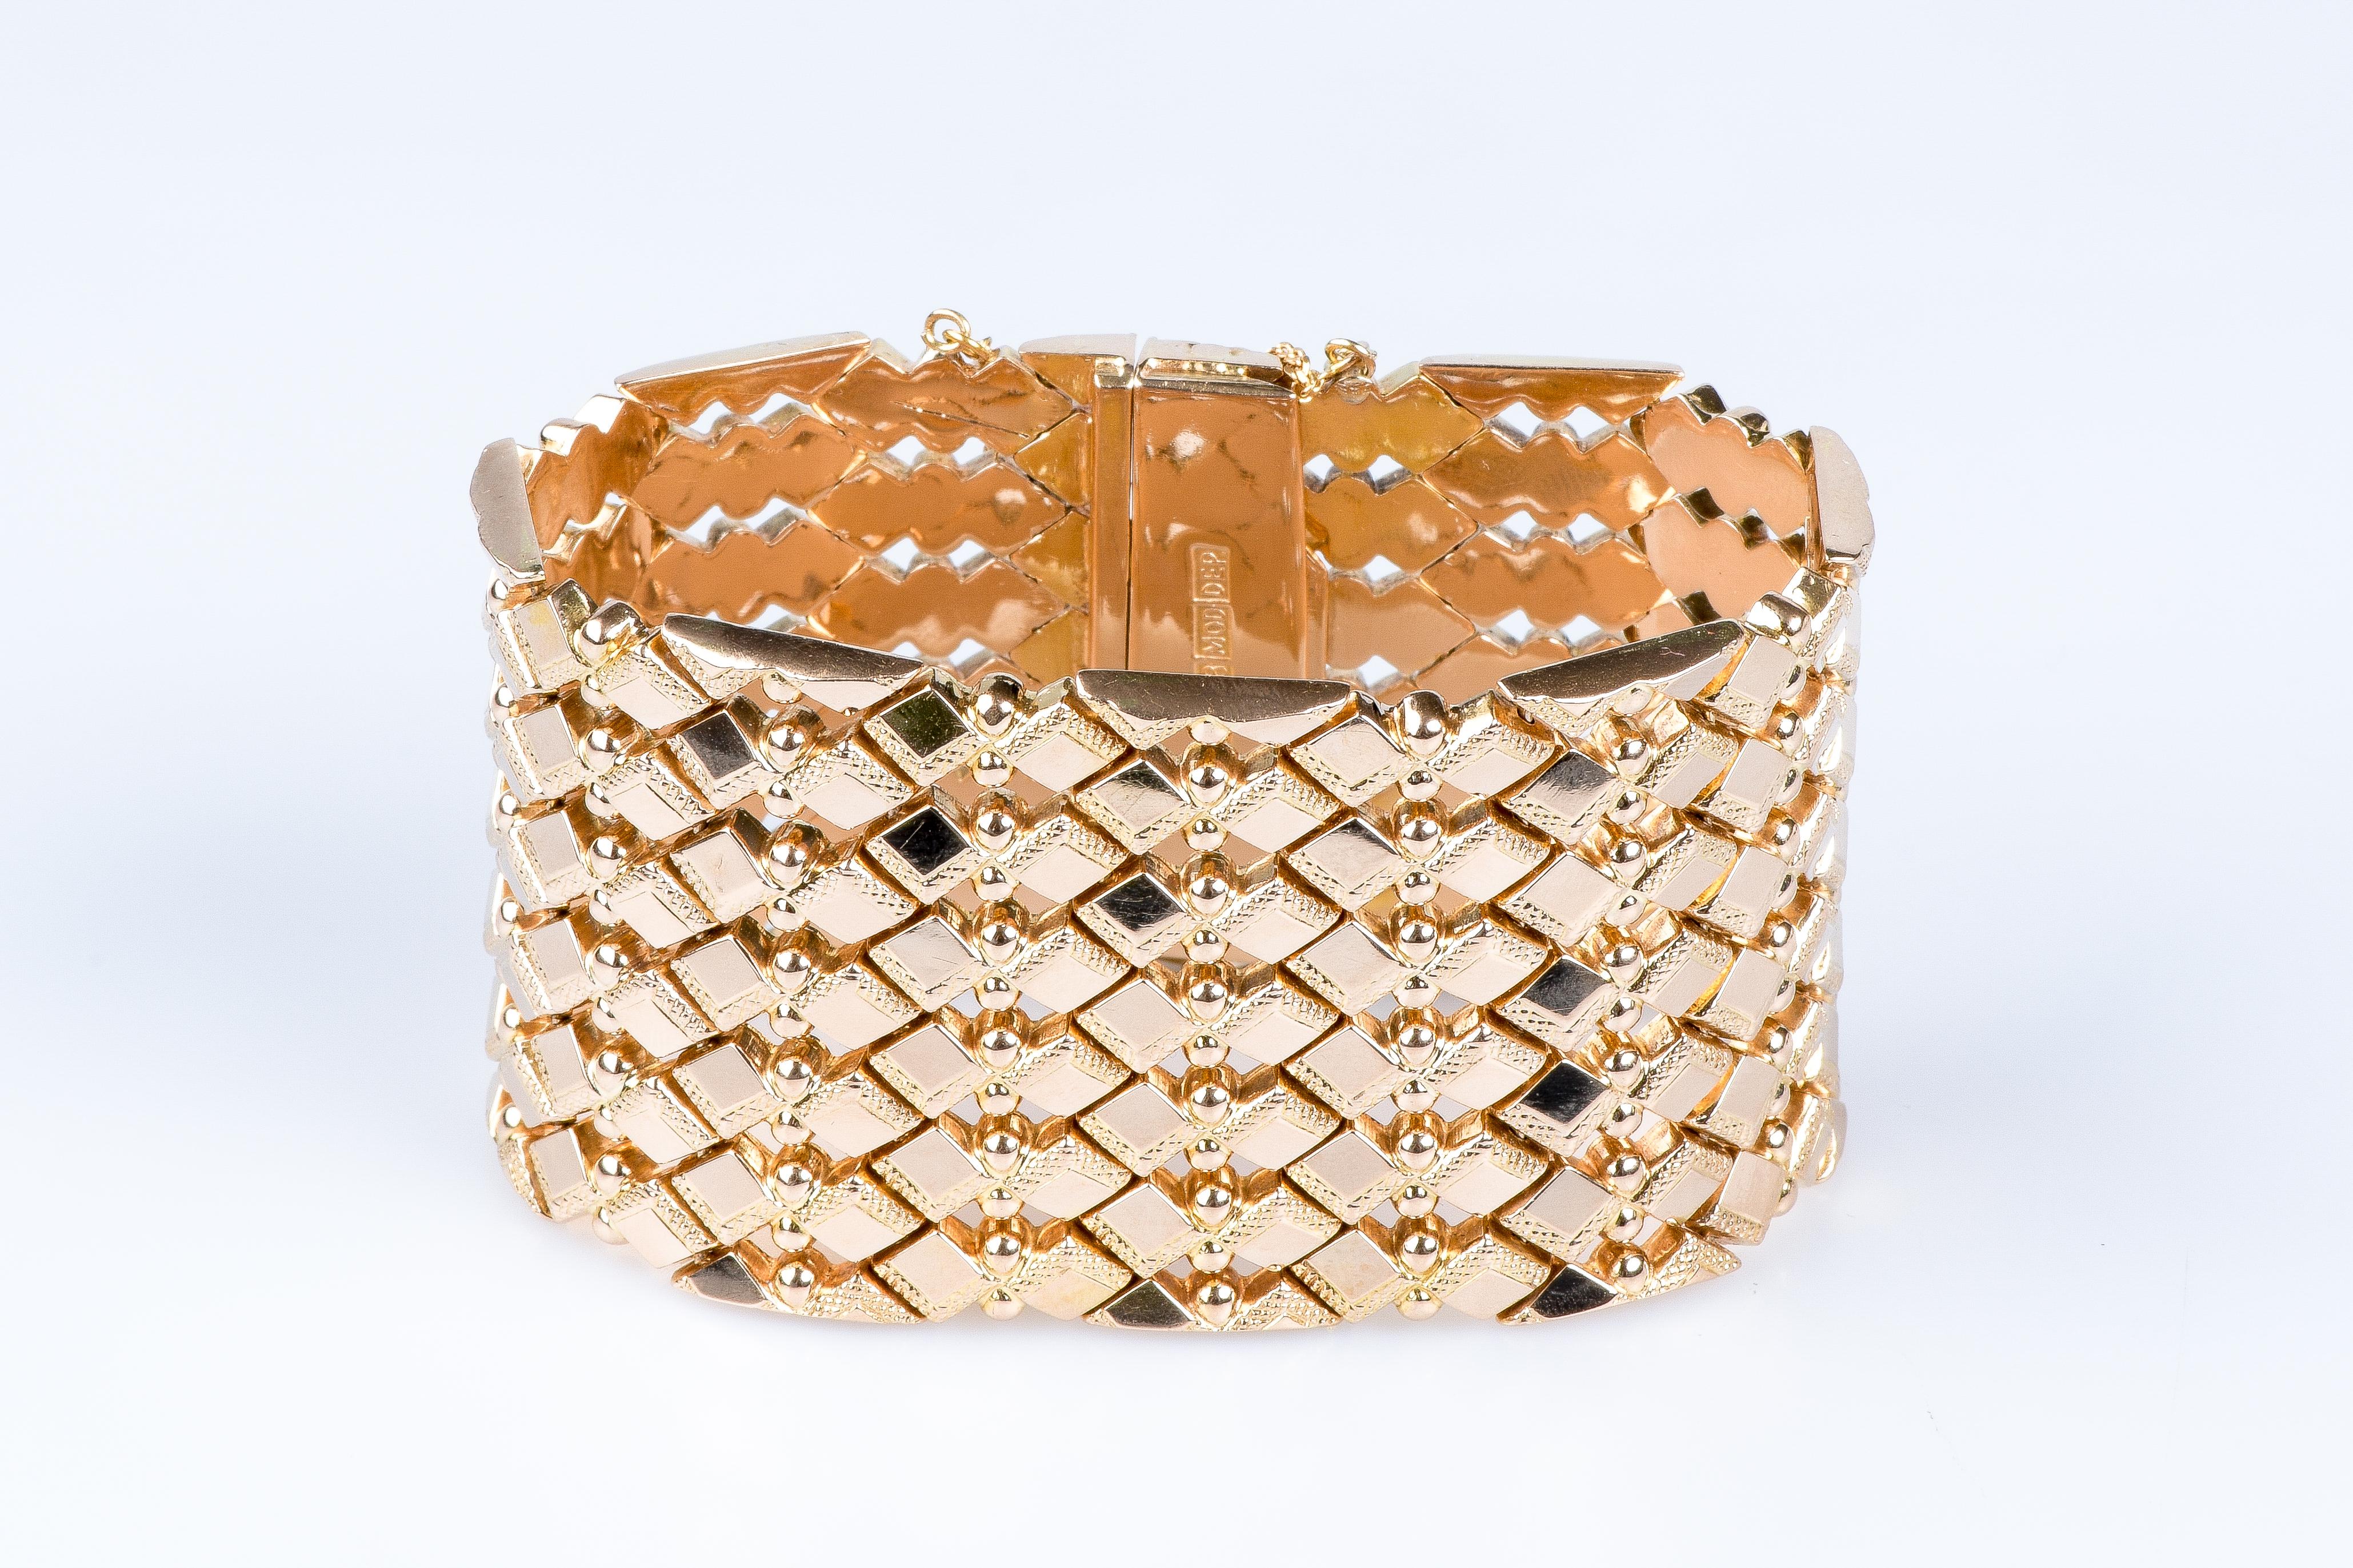 18 carat pink gold cuff bracelet designed with a safety chain closure. 

Weight:  68.10 gr. 

Dimensions : 16 x 4.00  cm

Jewel delivered with a luxurious box. 

Condition : Like new

18 carat gold eagle head hallmark on the jewel. 

Secure and